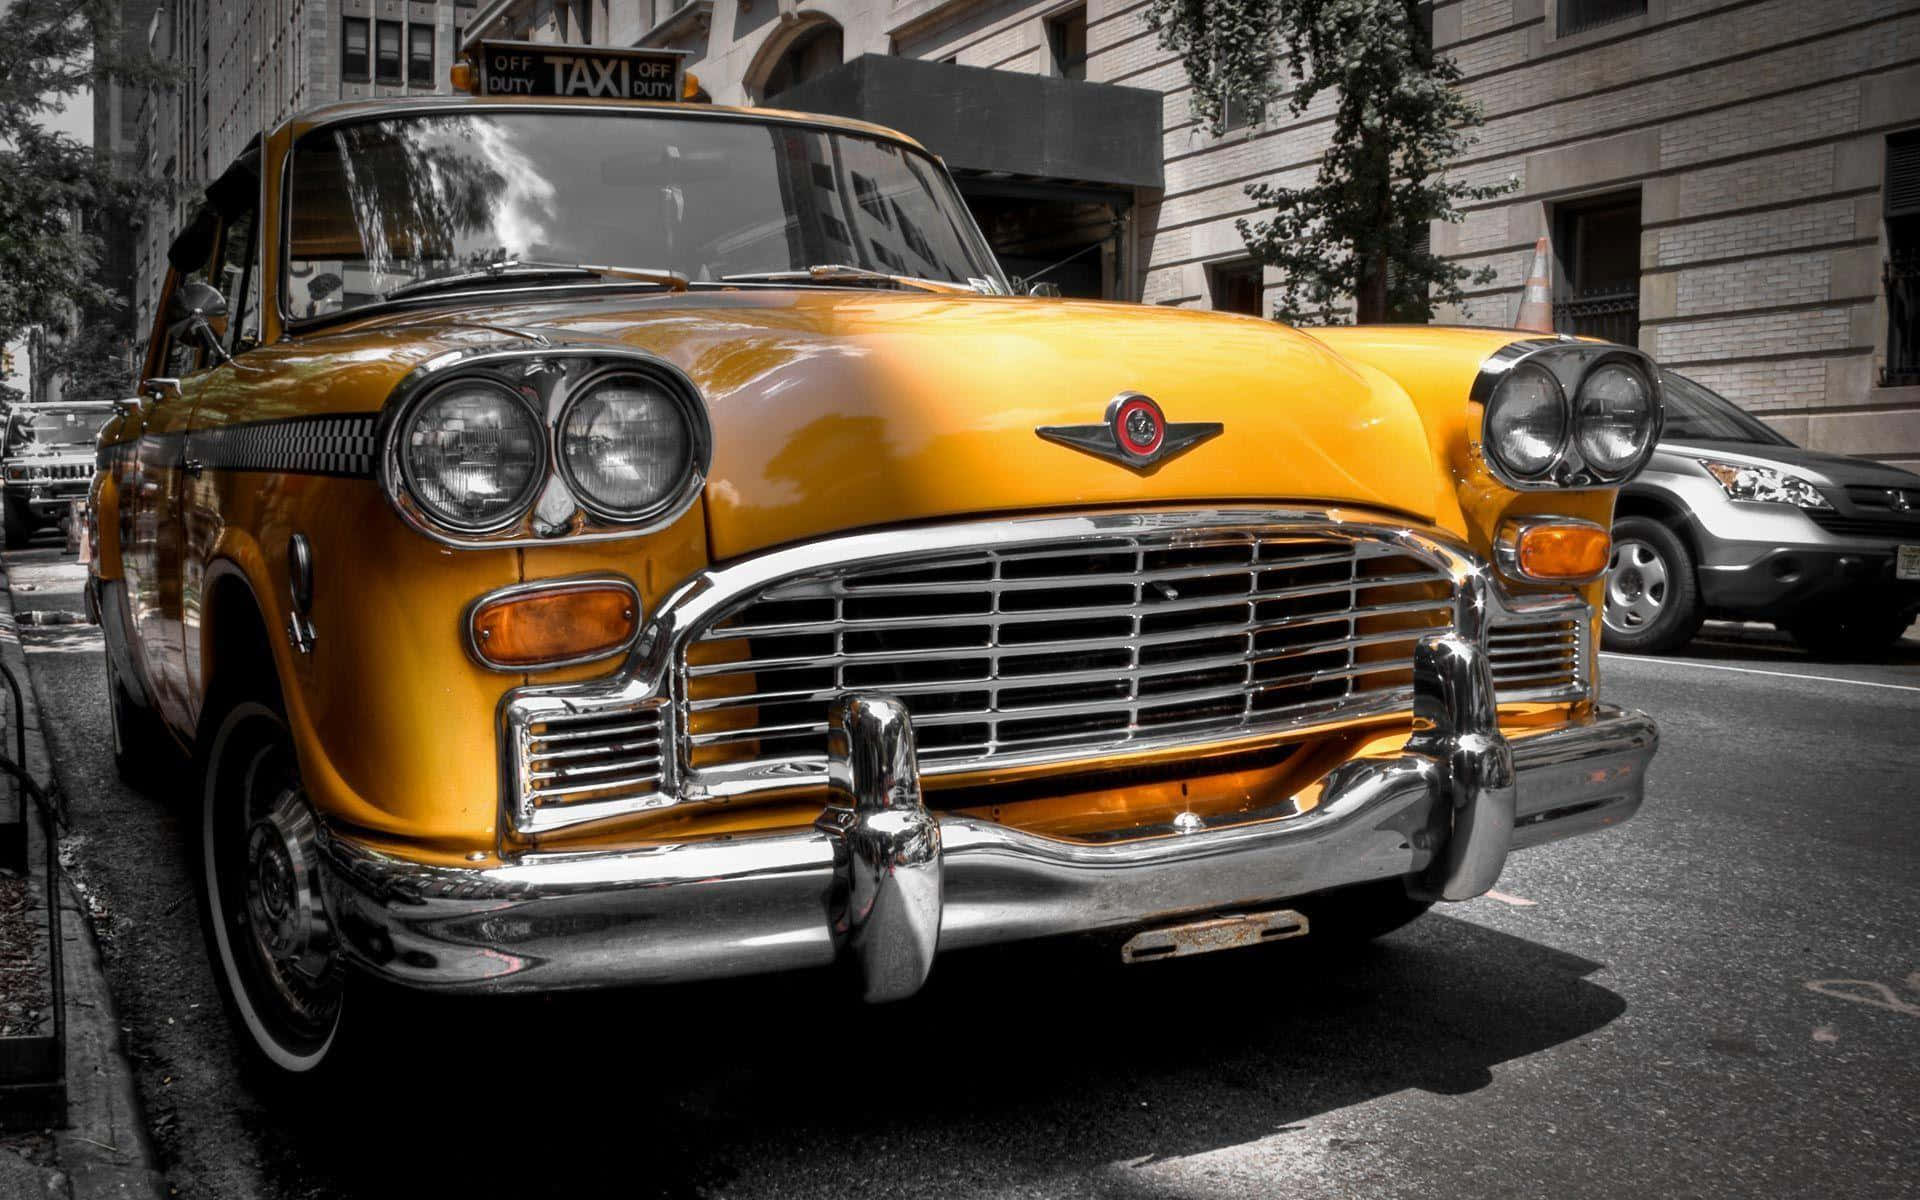 Yellow Cab on City Street in Urban Environment Wallpaper